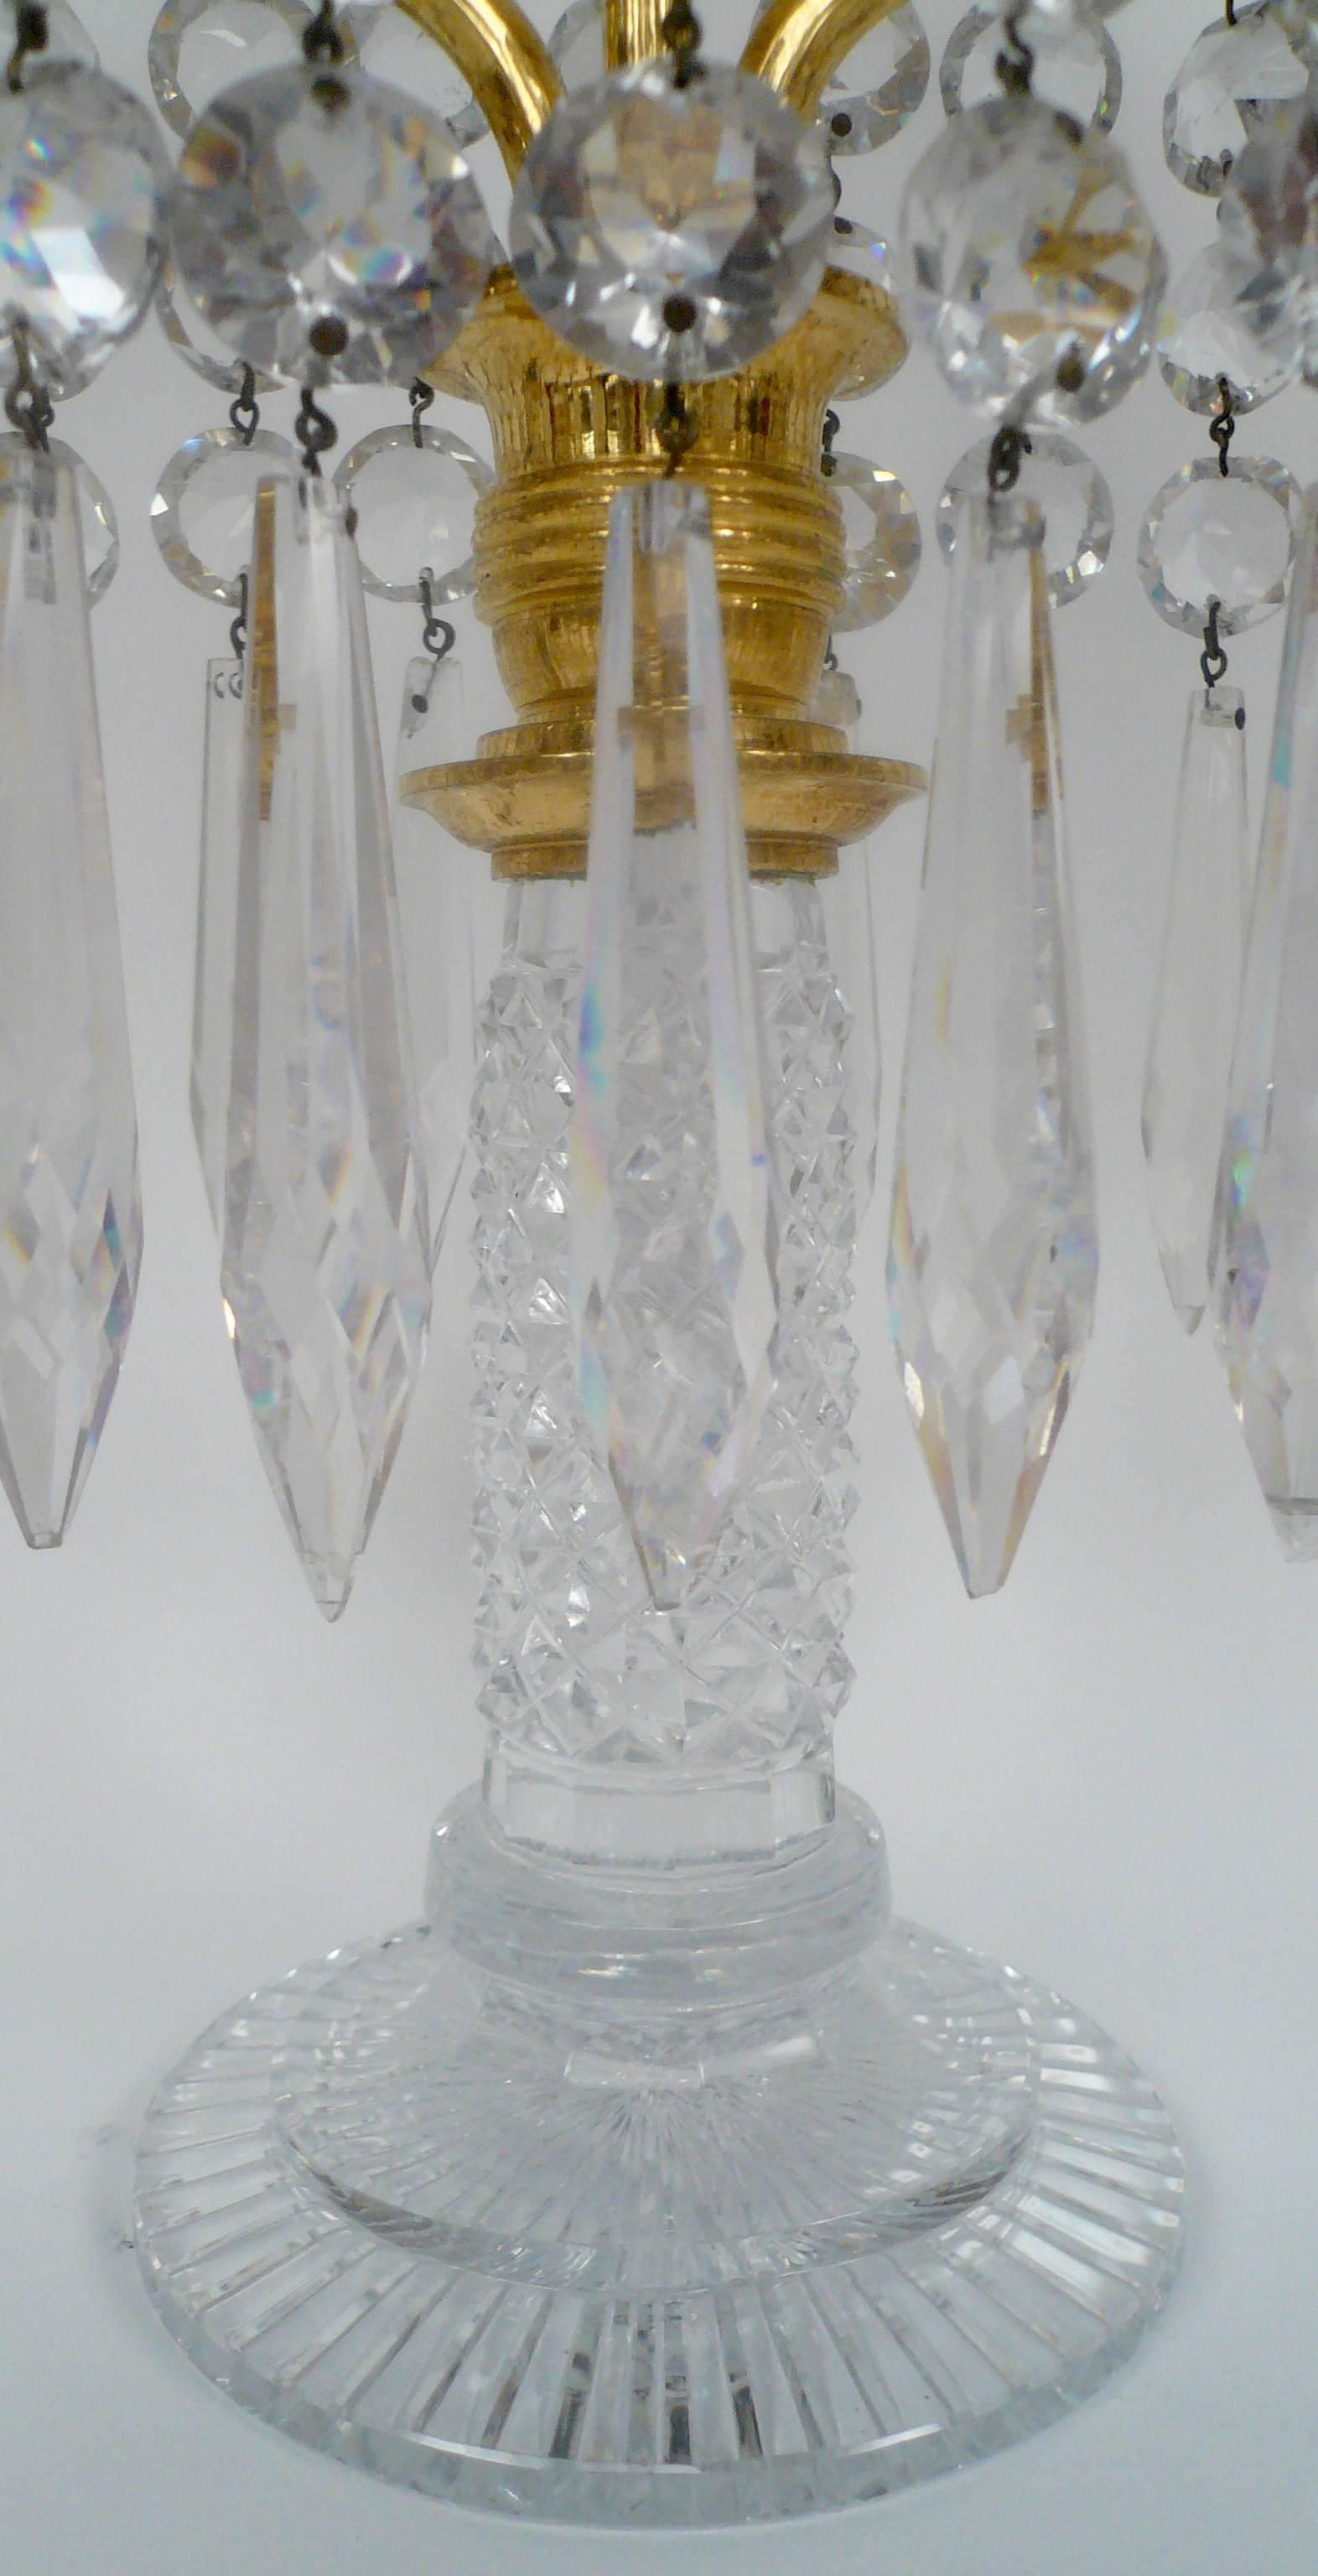 Pair of English Regency Cut Glass Candelabra, Attributed to John Blades In Excellent Condition For Sale In Pittsburgh, PA